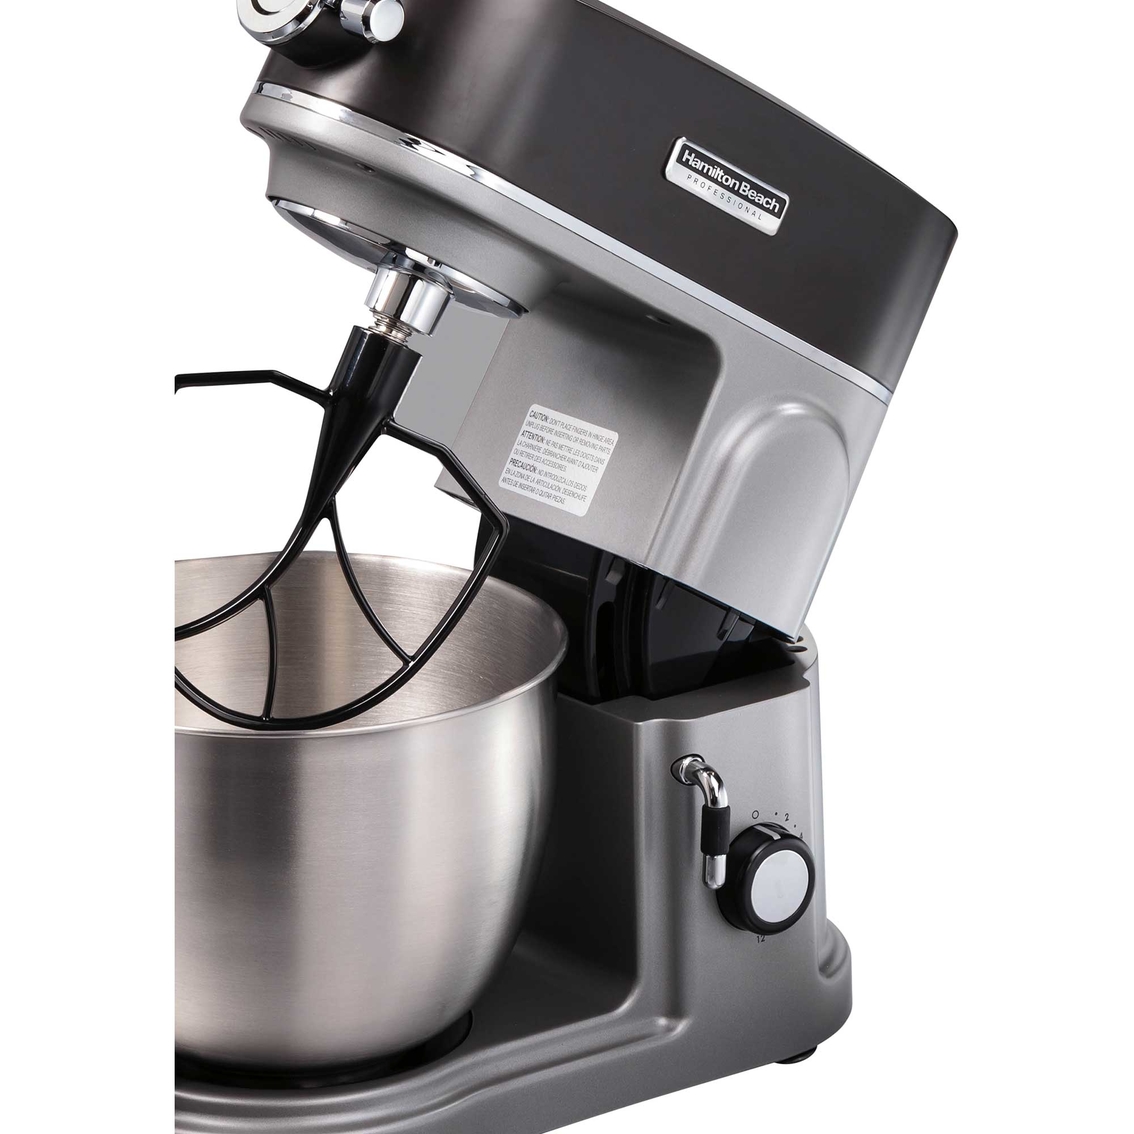 Hamilton Beach Professional All Metal Stand Mixer - Image 4 of 7